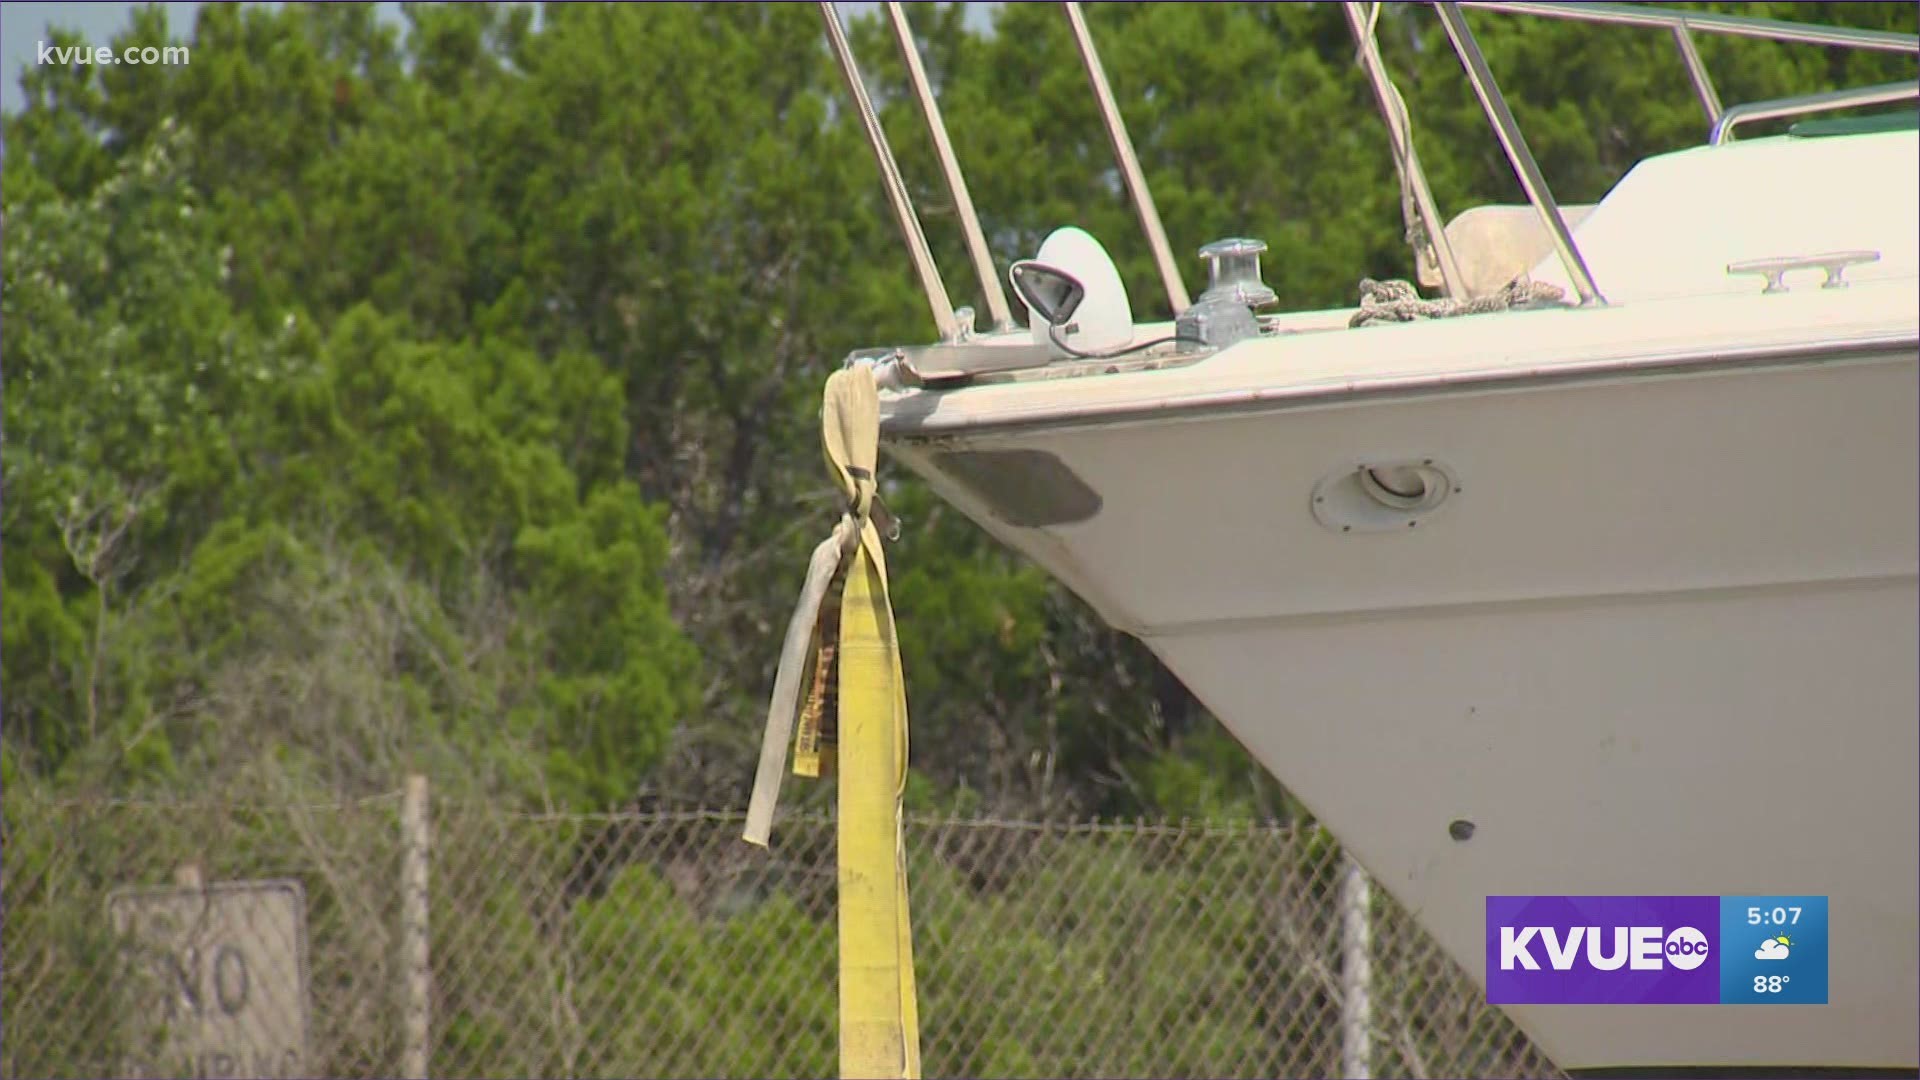 After more than a week of being stuck on SH 71, the Bee Cave boat is finally heading home.